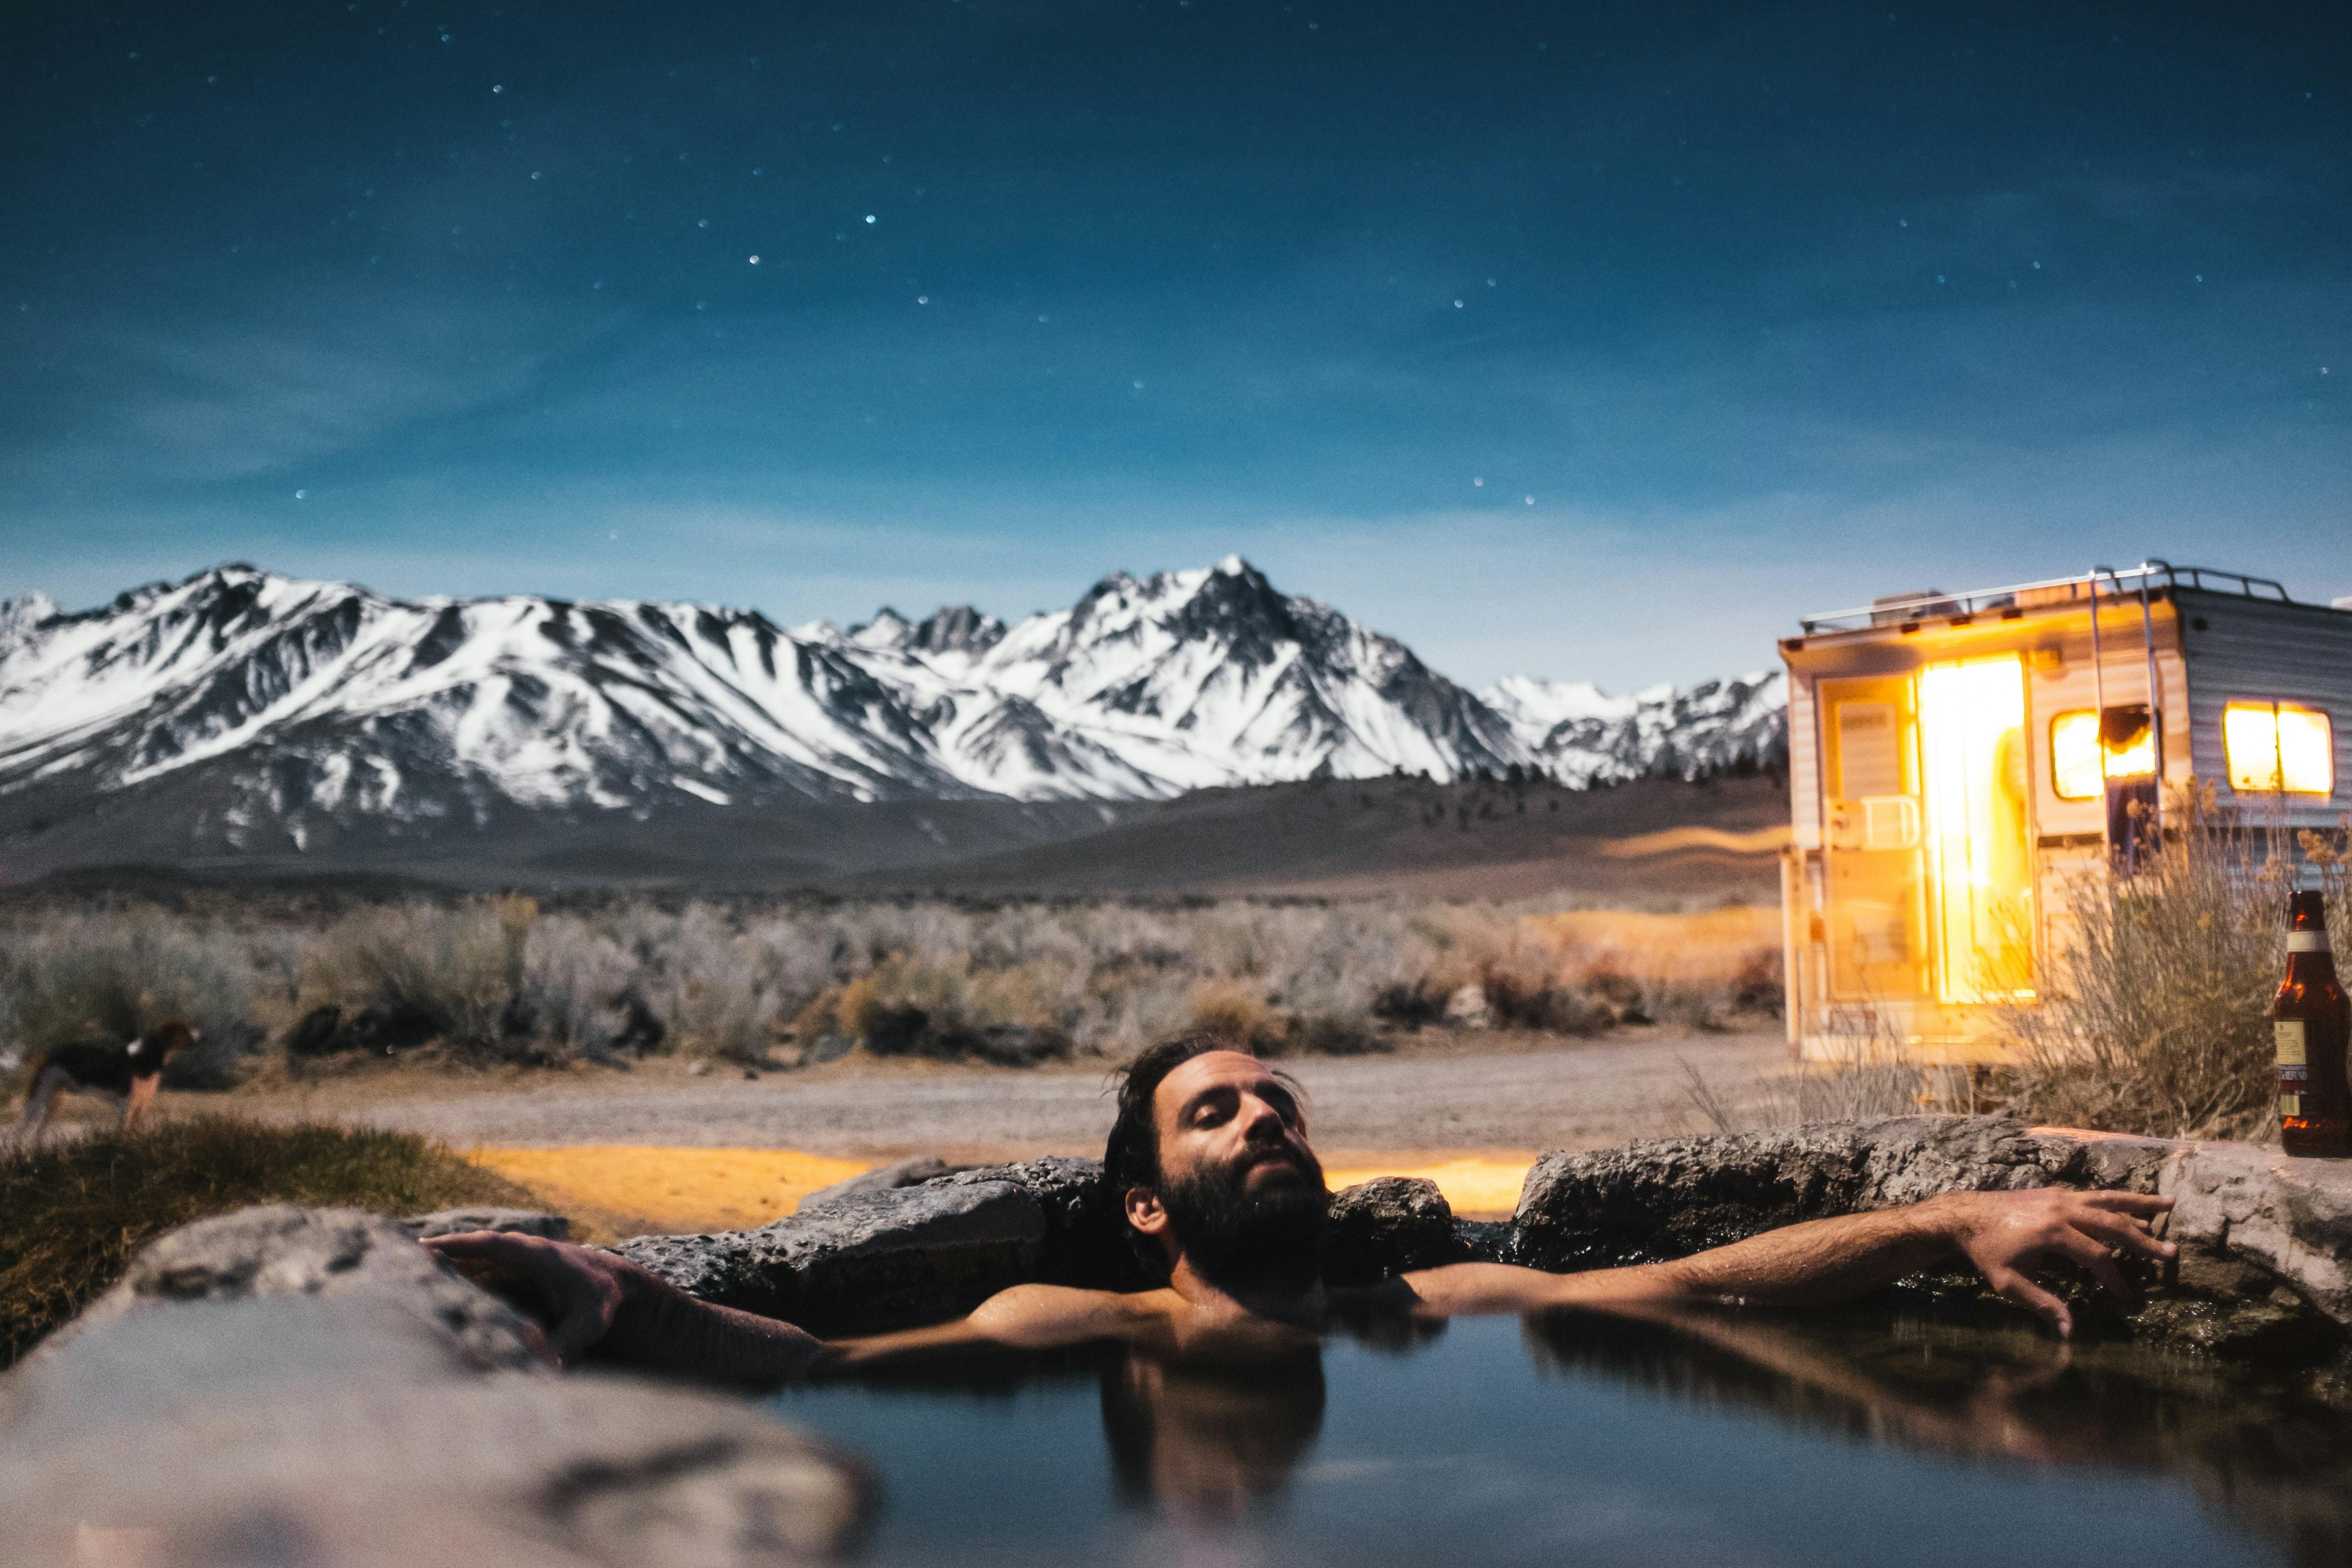 Man relaxing in a natural hot spring with his campervan and snowy mountains in the background